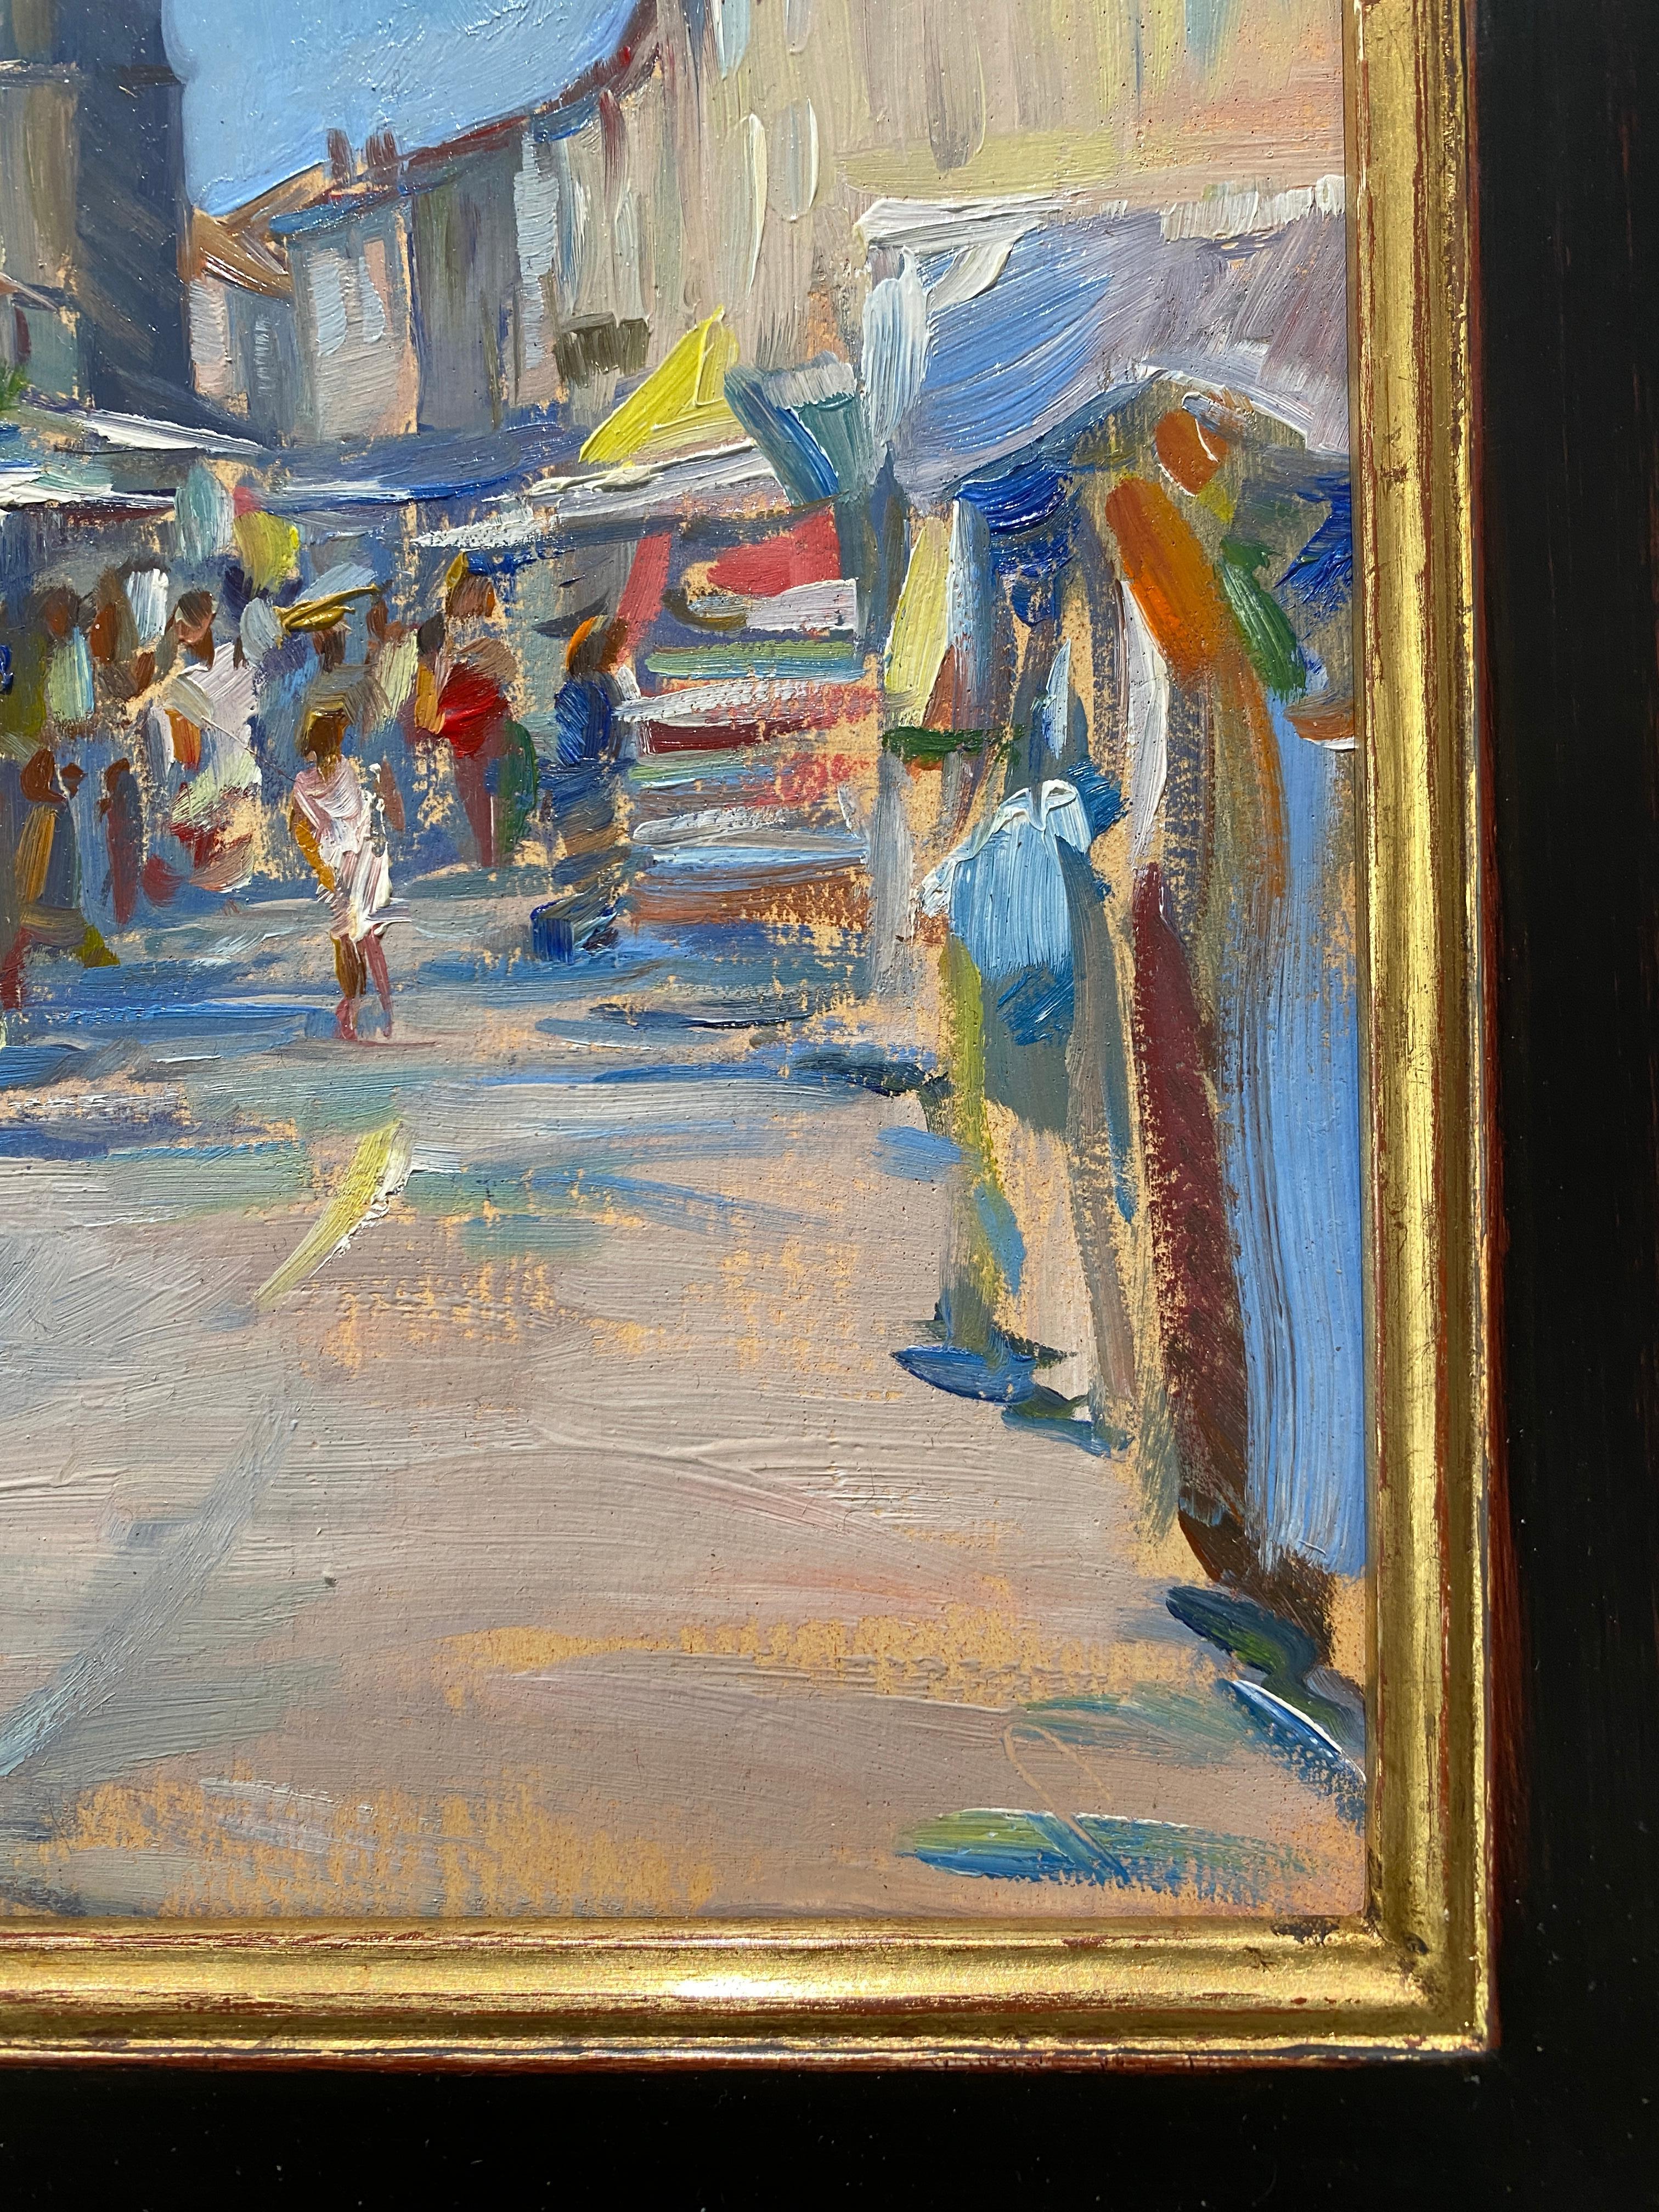 Lectoure Market - Impressionist Painting by Tina Orsolic Dalessio